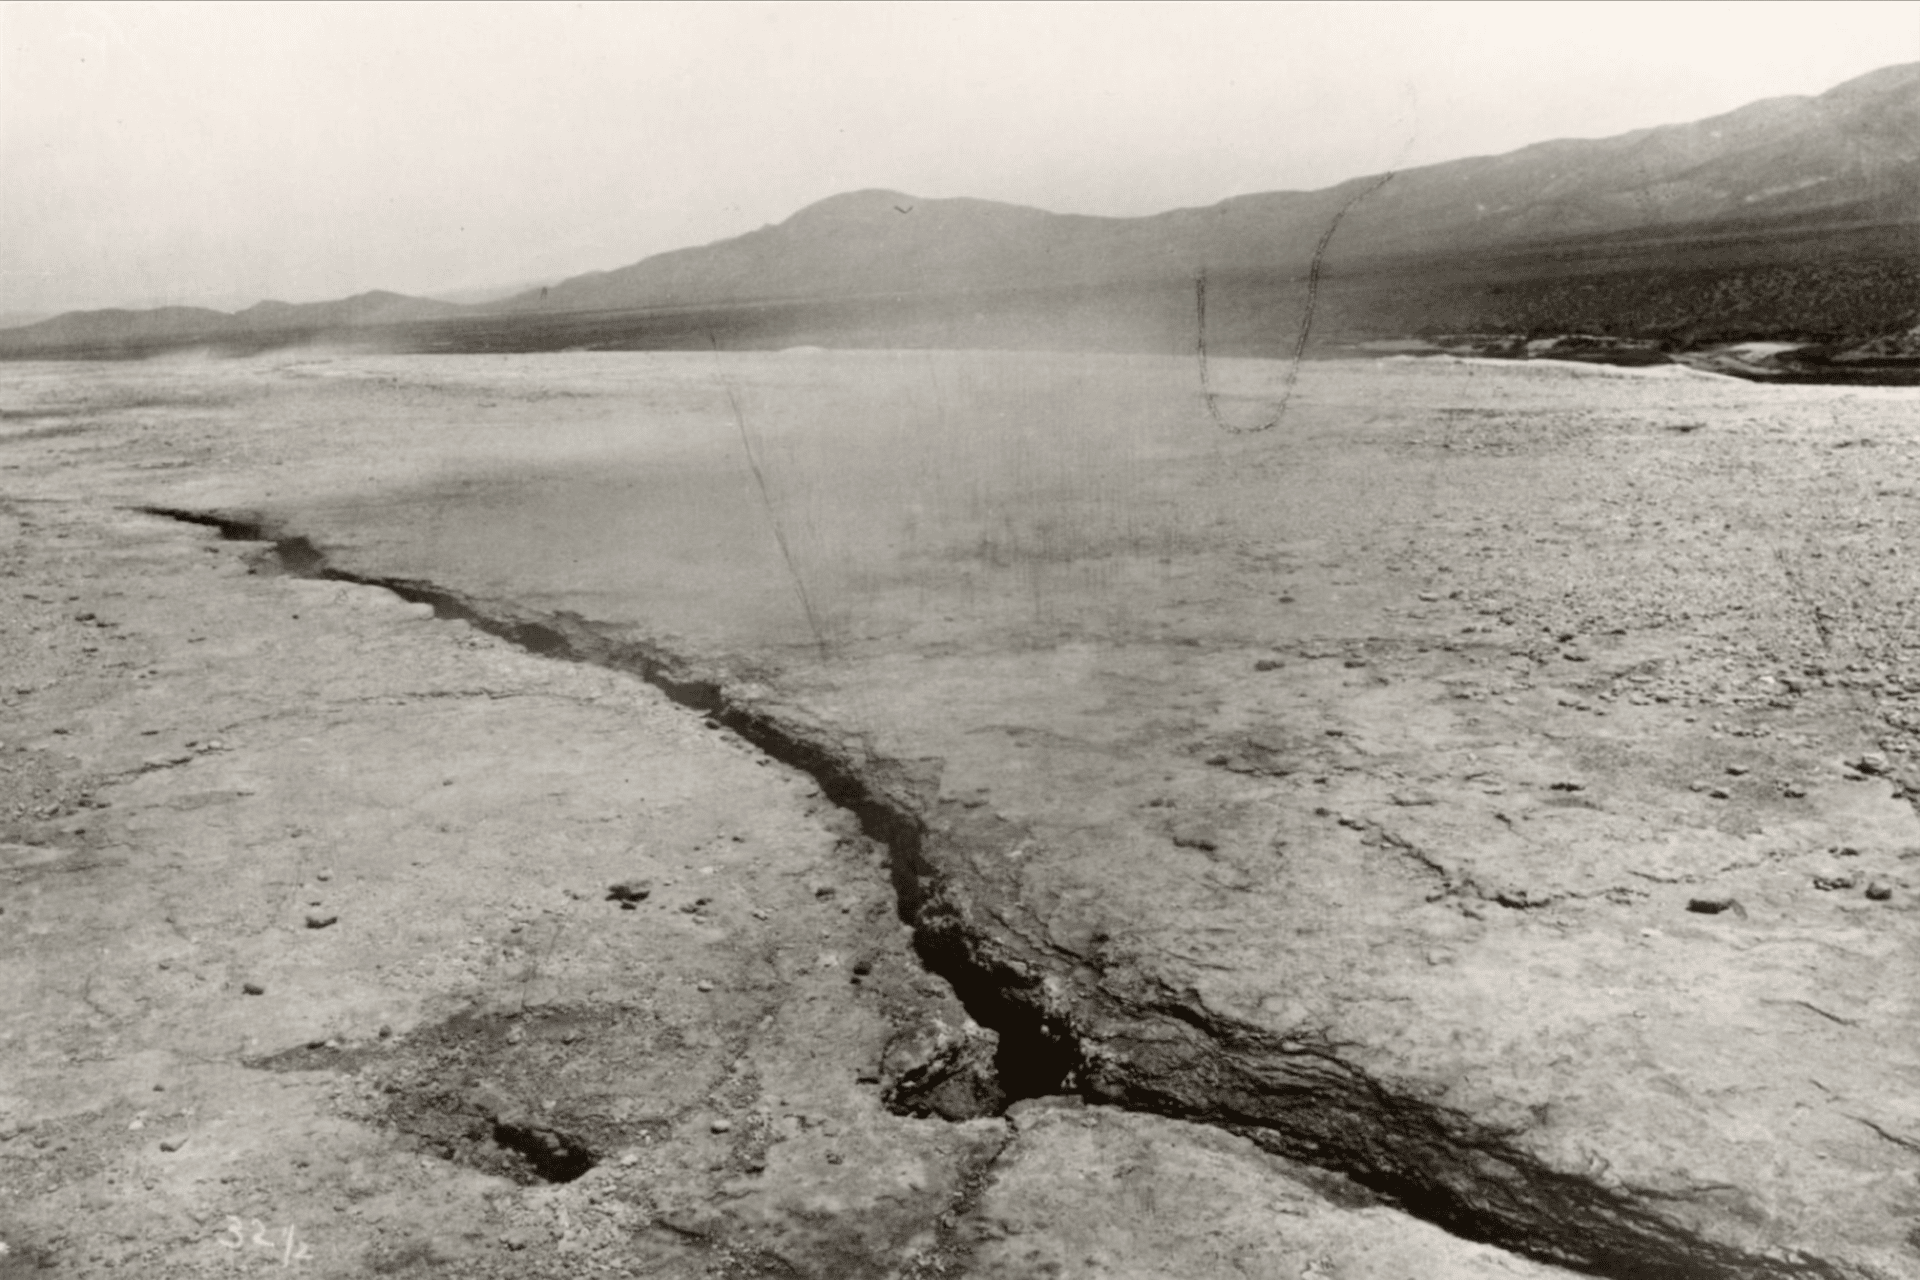 Fissures at Steamboat Springs, just south of Reno, Nevada, photographed by Timothy O’Sullivan in 1868 and by the author in 2022. On cold days, steam can sometimes still be seen rising from the earth.